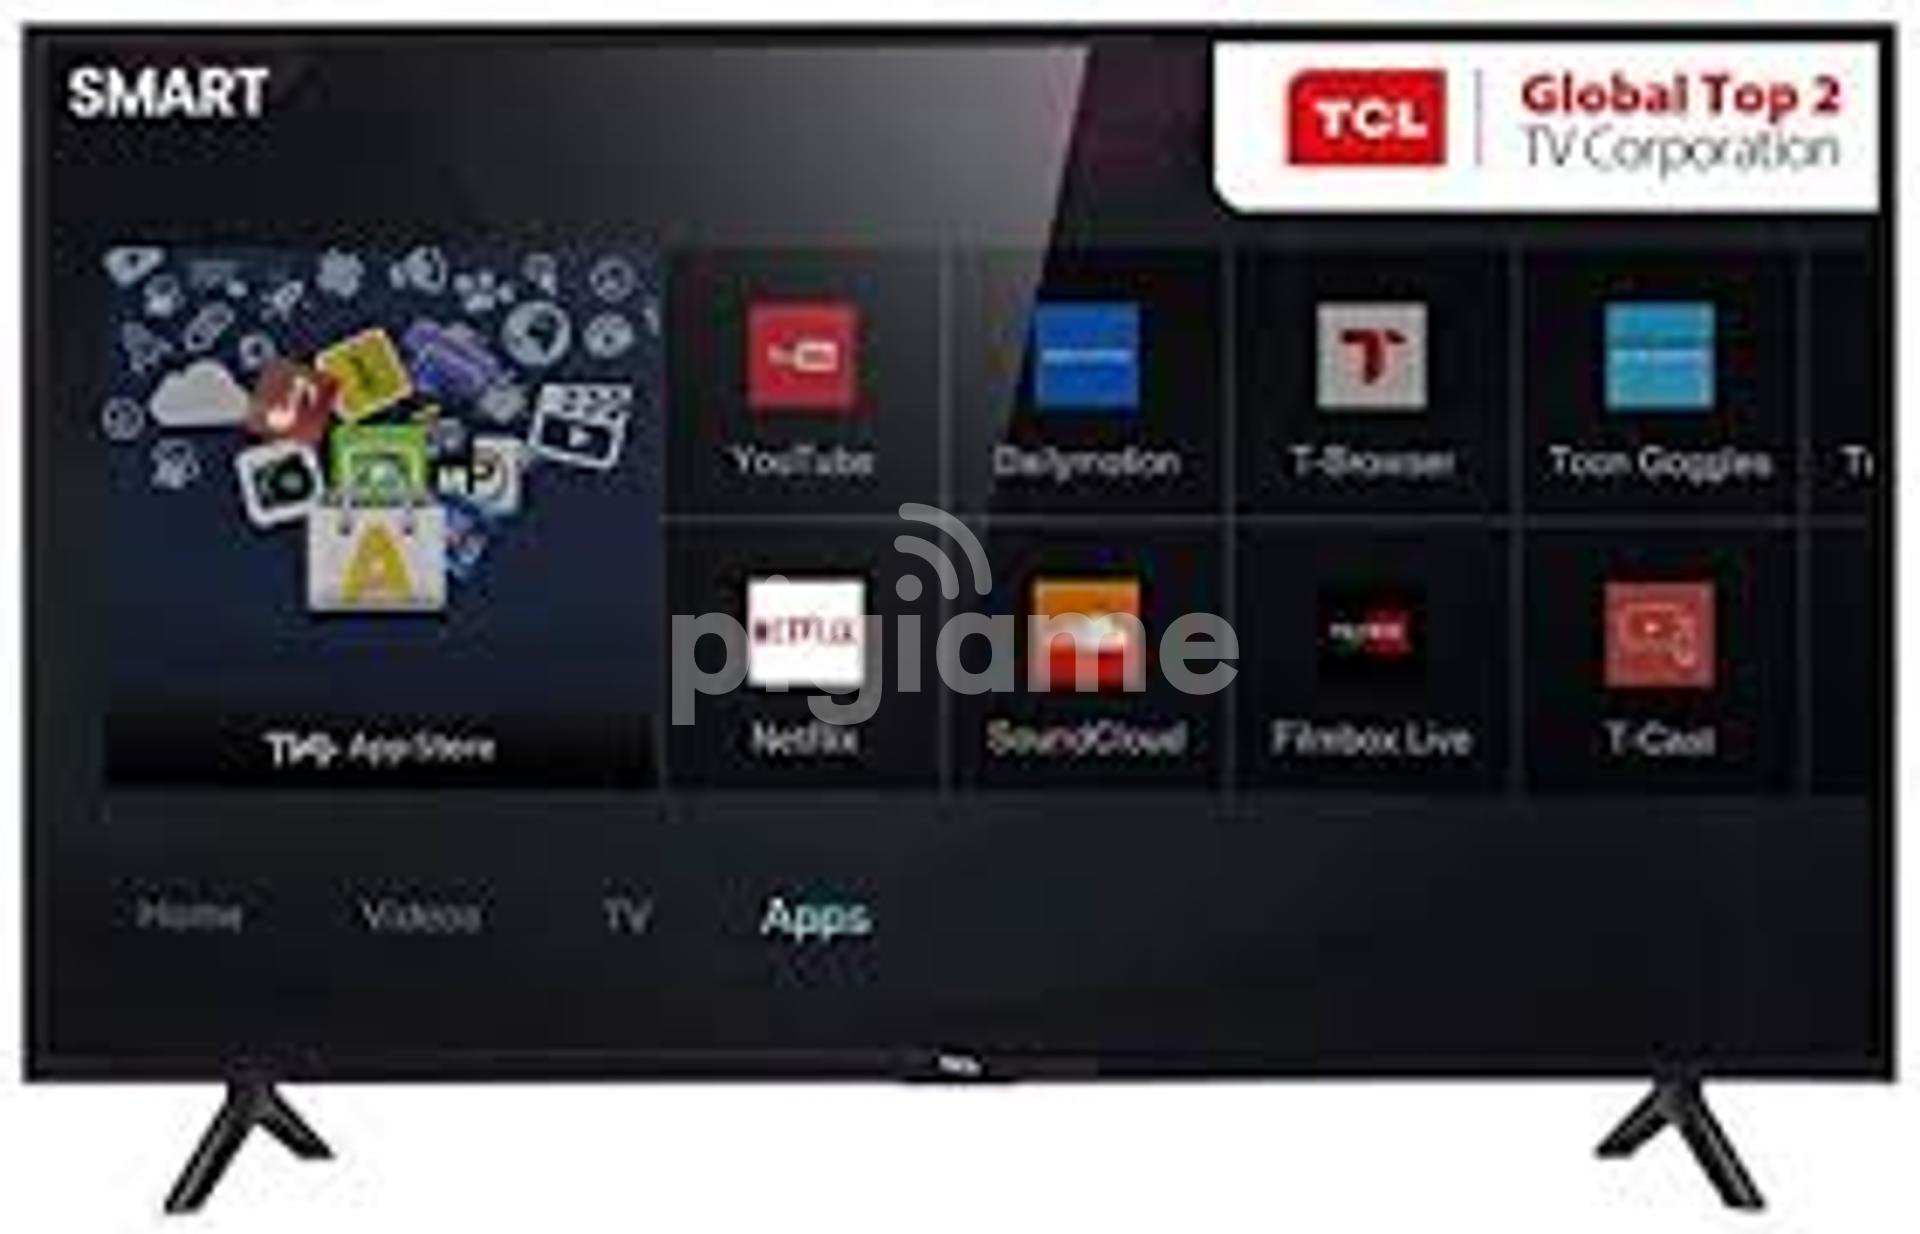 Днс телевизоры смарт 32 дюйма. TCL TV s6500. TCL Smart TV. TCL Android TV 32s6500. Телевизор смарт ТСЛ.